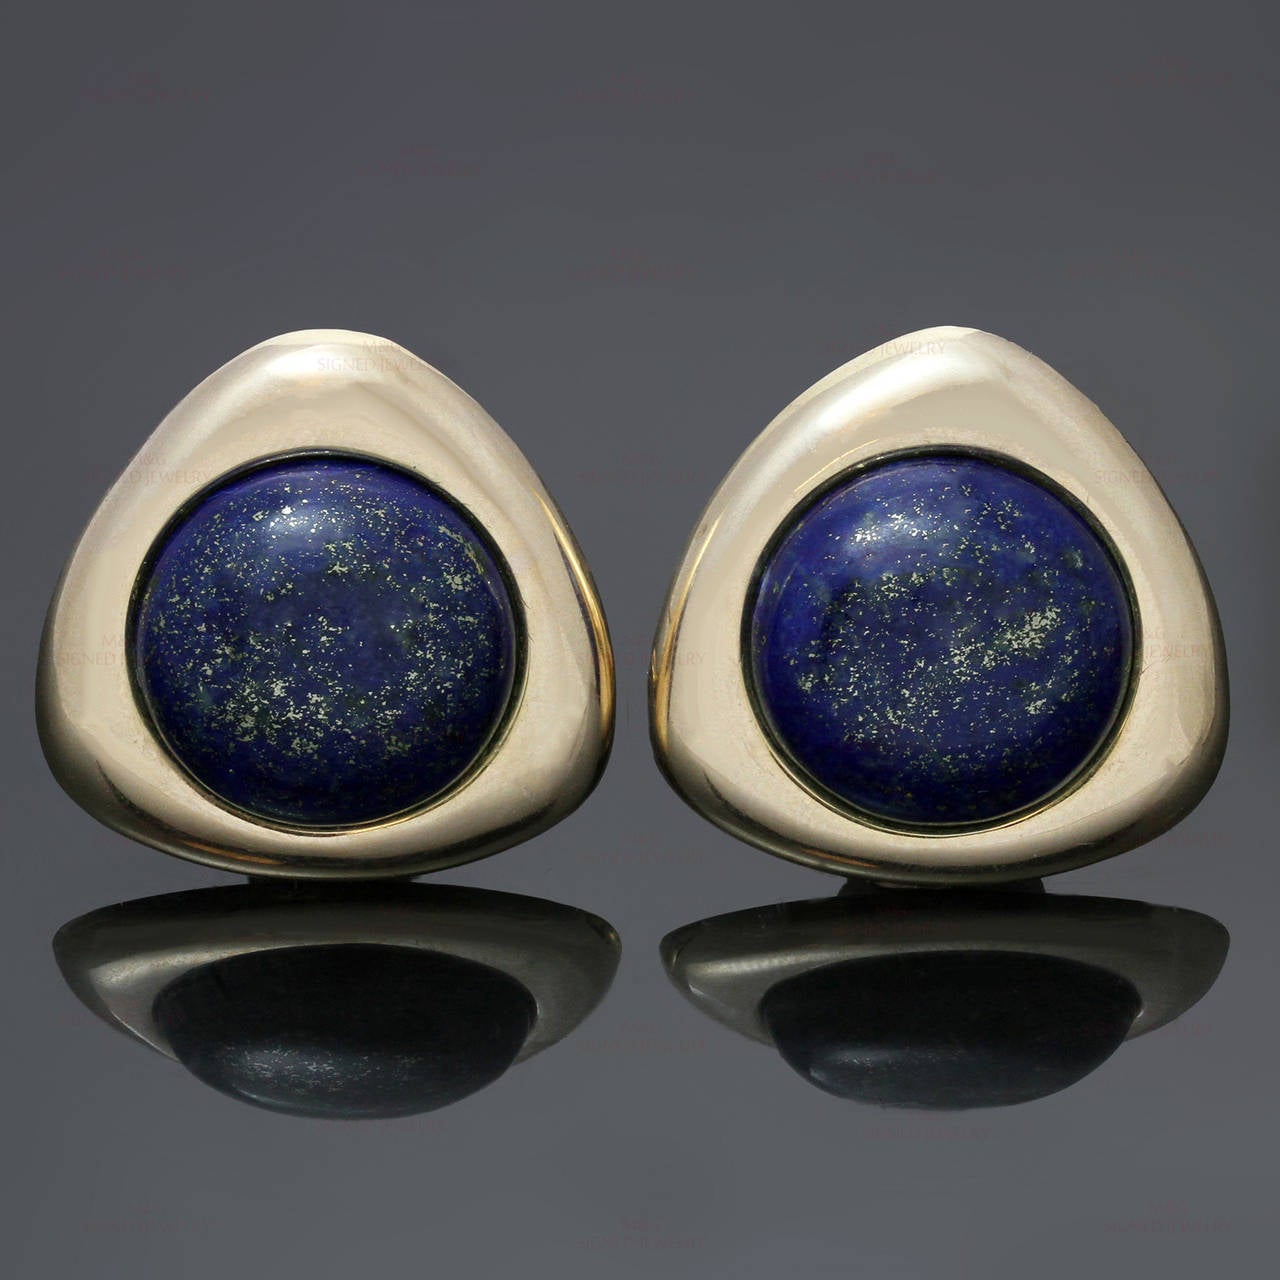 These chic vintage triangular lever-back earrings are crafted in 14k yellow gold and elegantly accented with round 18.0mm lapis lazuli stones. Made in United States circa 1980s. Measurements: 1.06" (27mm) width.